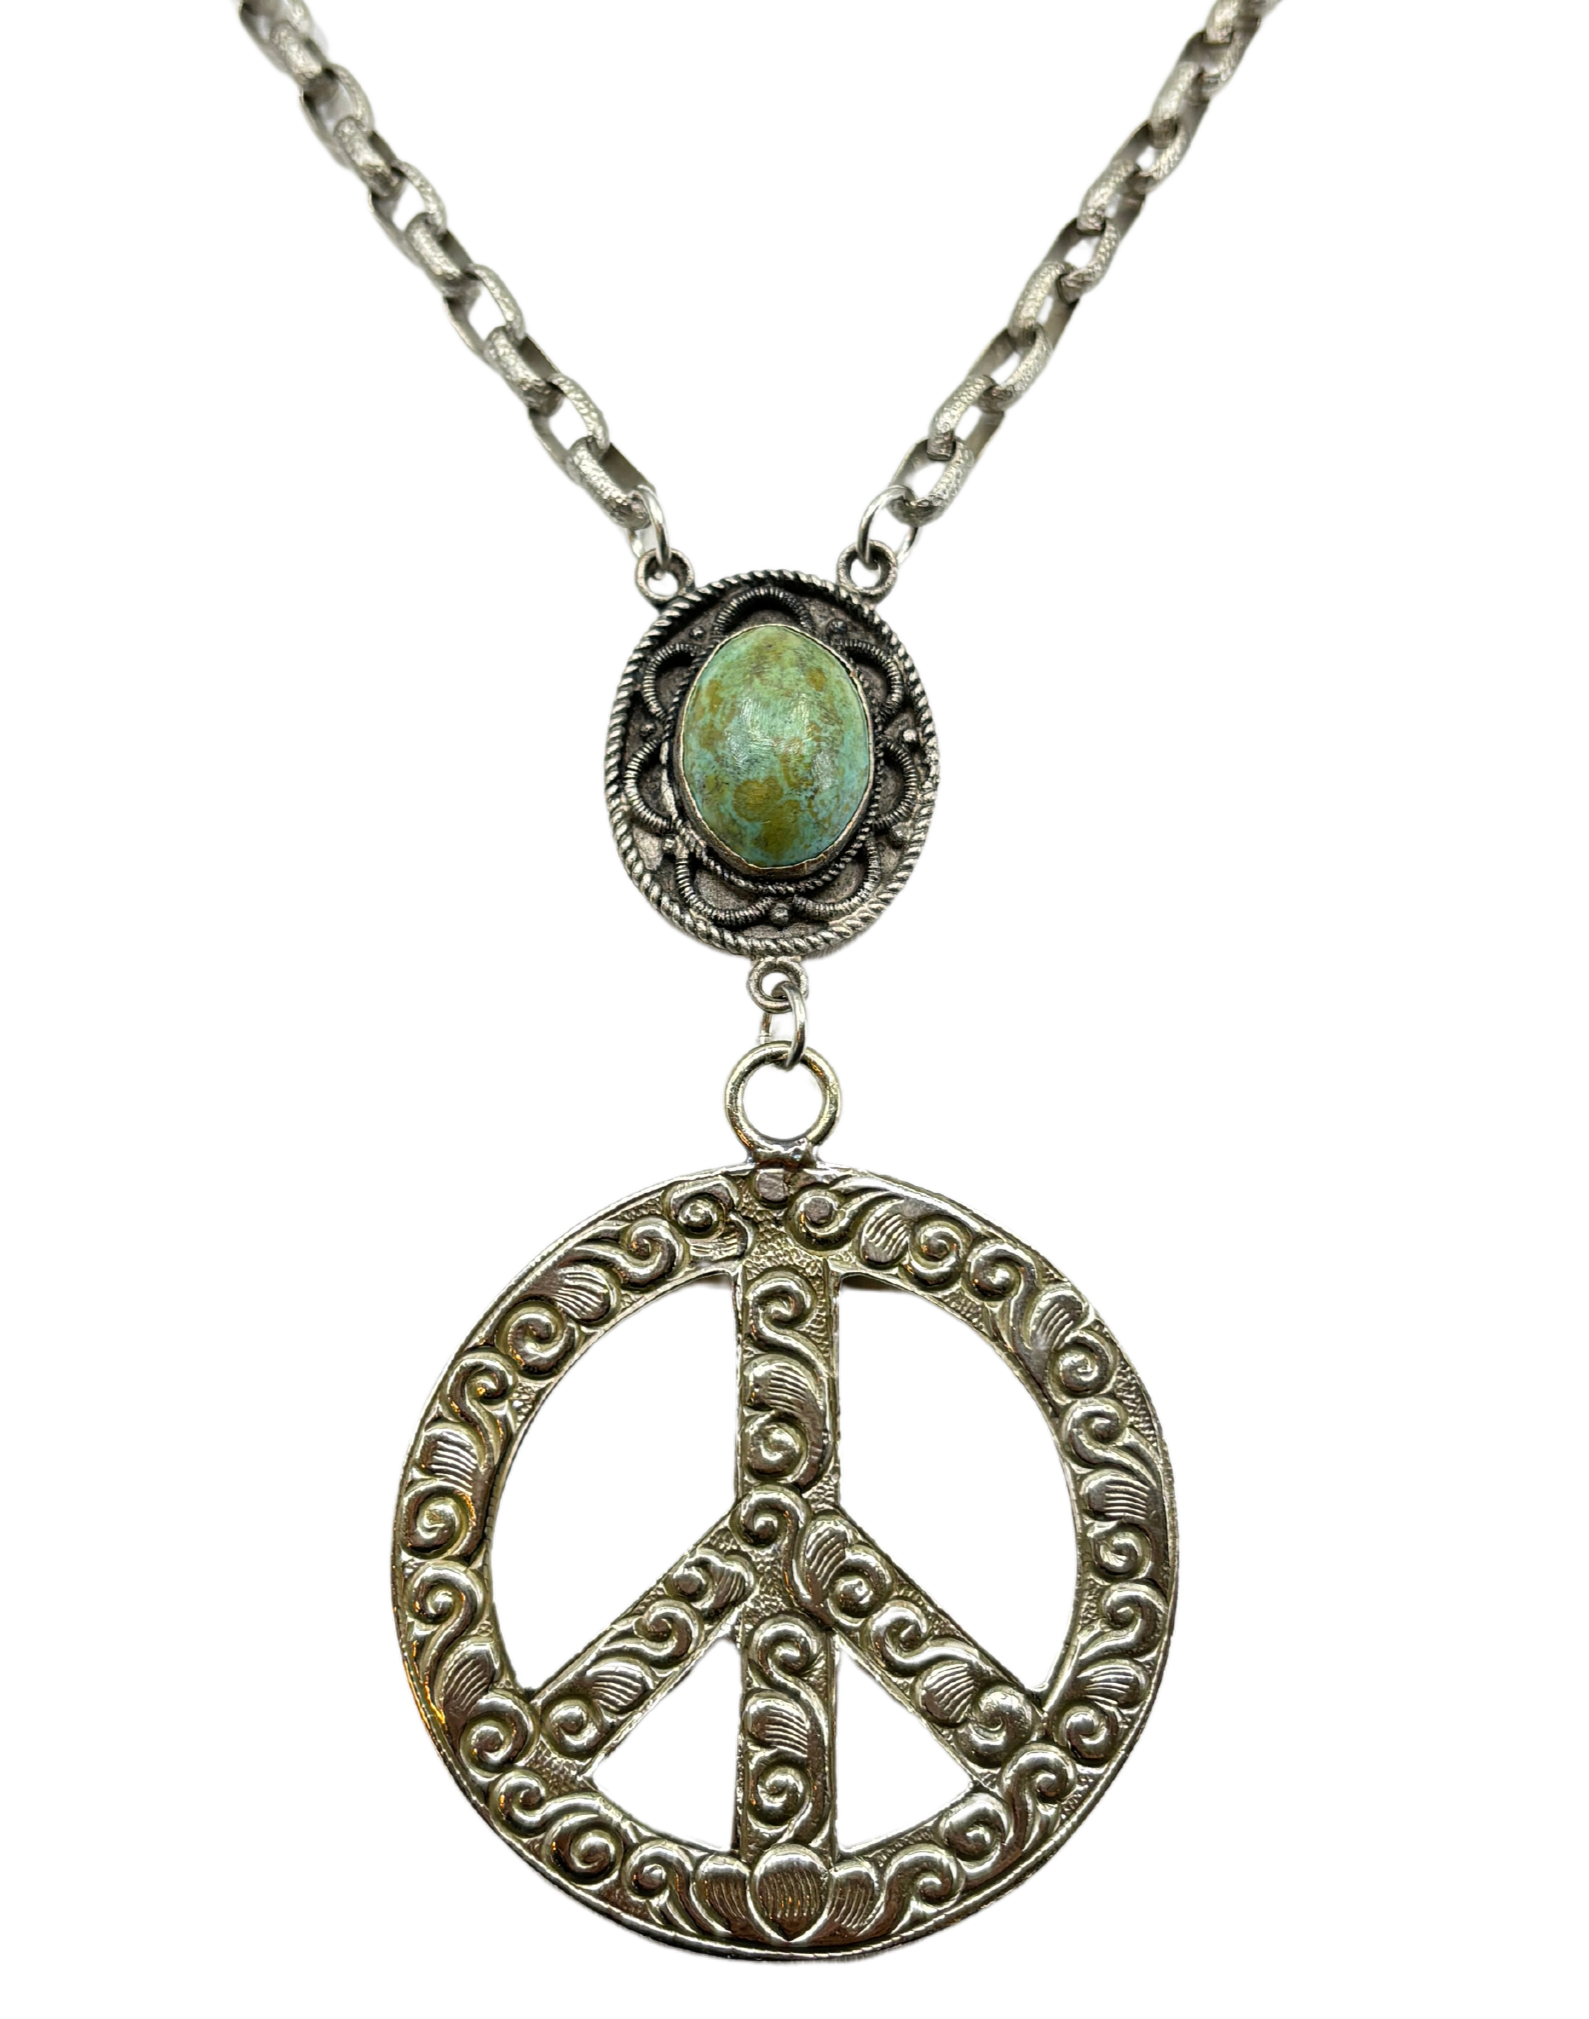 Silver Peace Sign Necklace